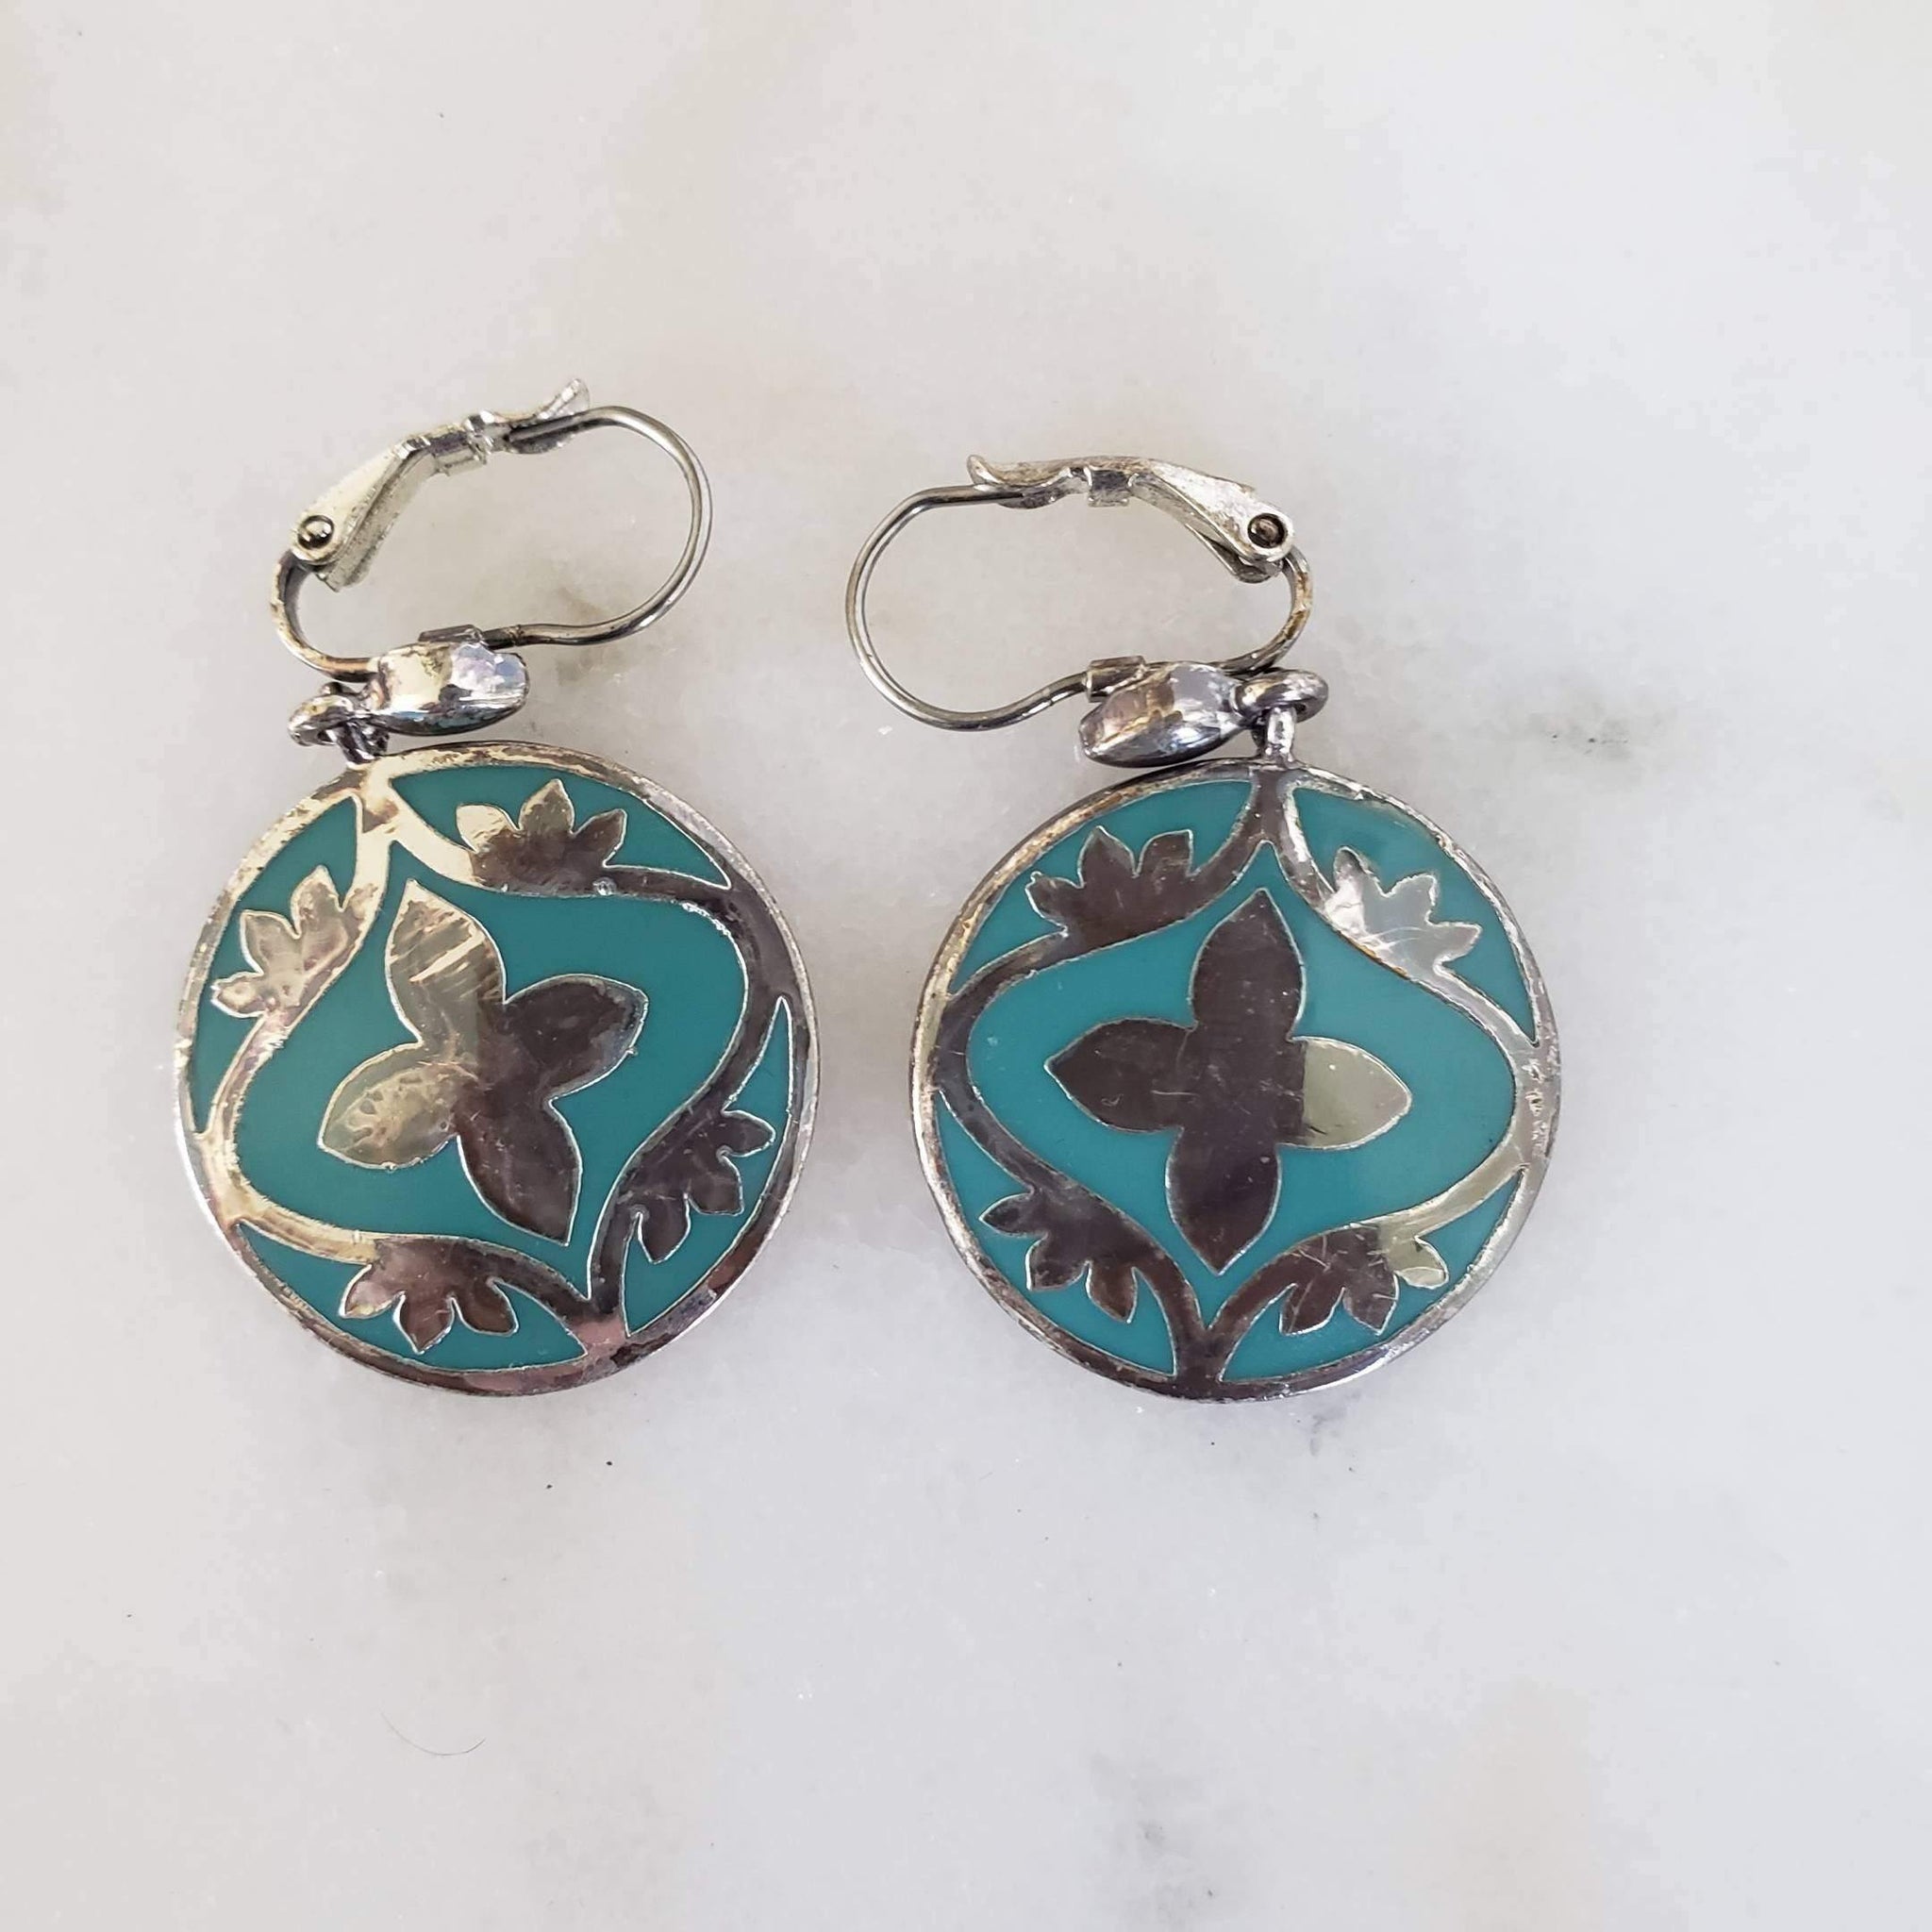 Silver Tone And Turquoise Colored Circle Dangle Drop Earrings - ChicCityVintage